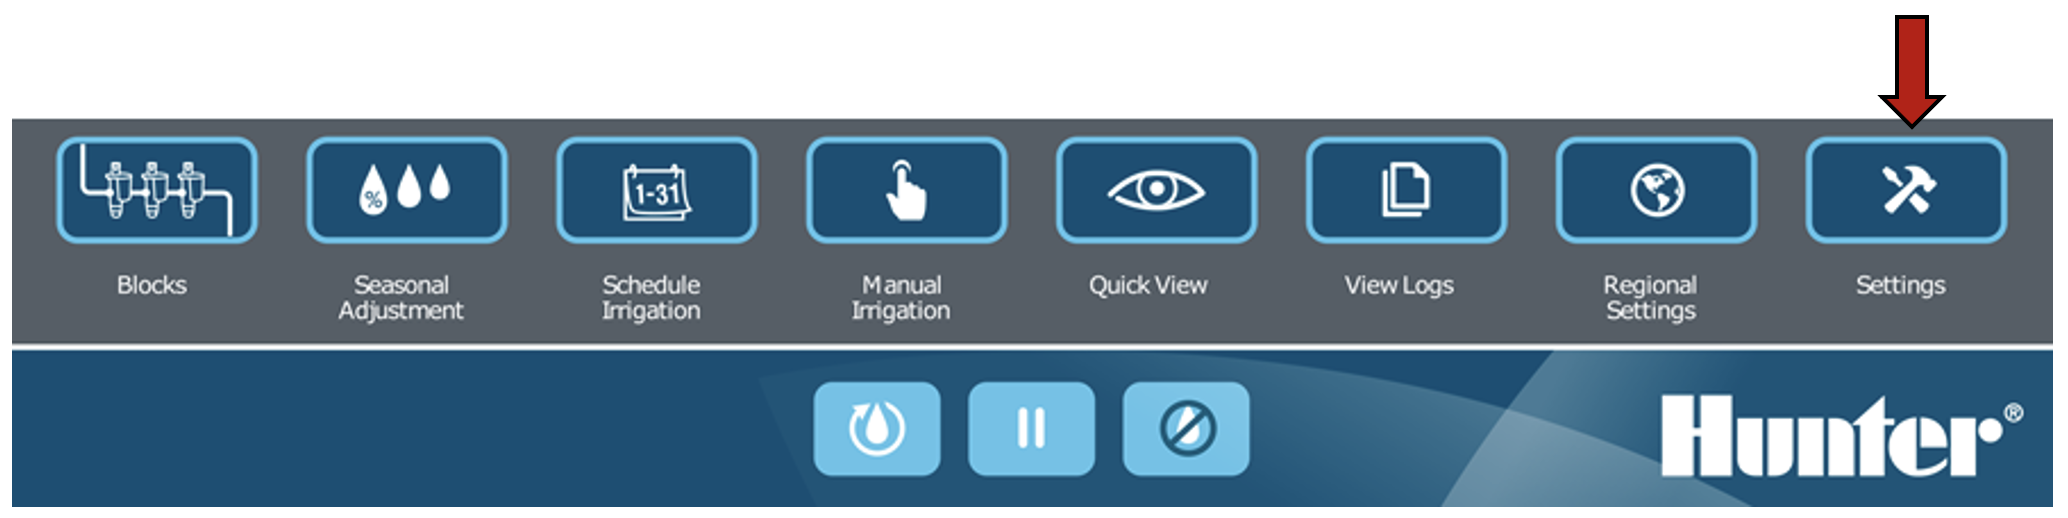 Image of the interface with the Settings button highlighted.